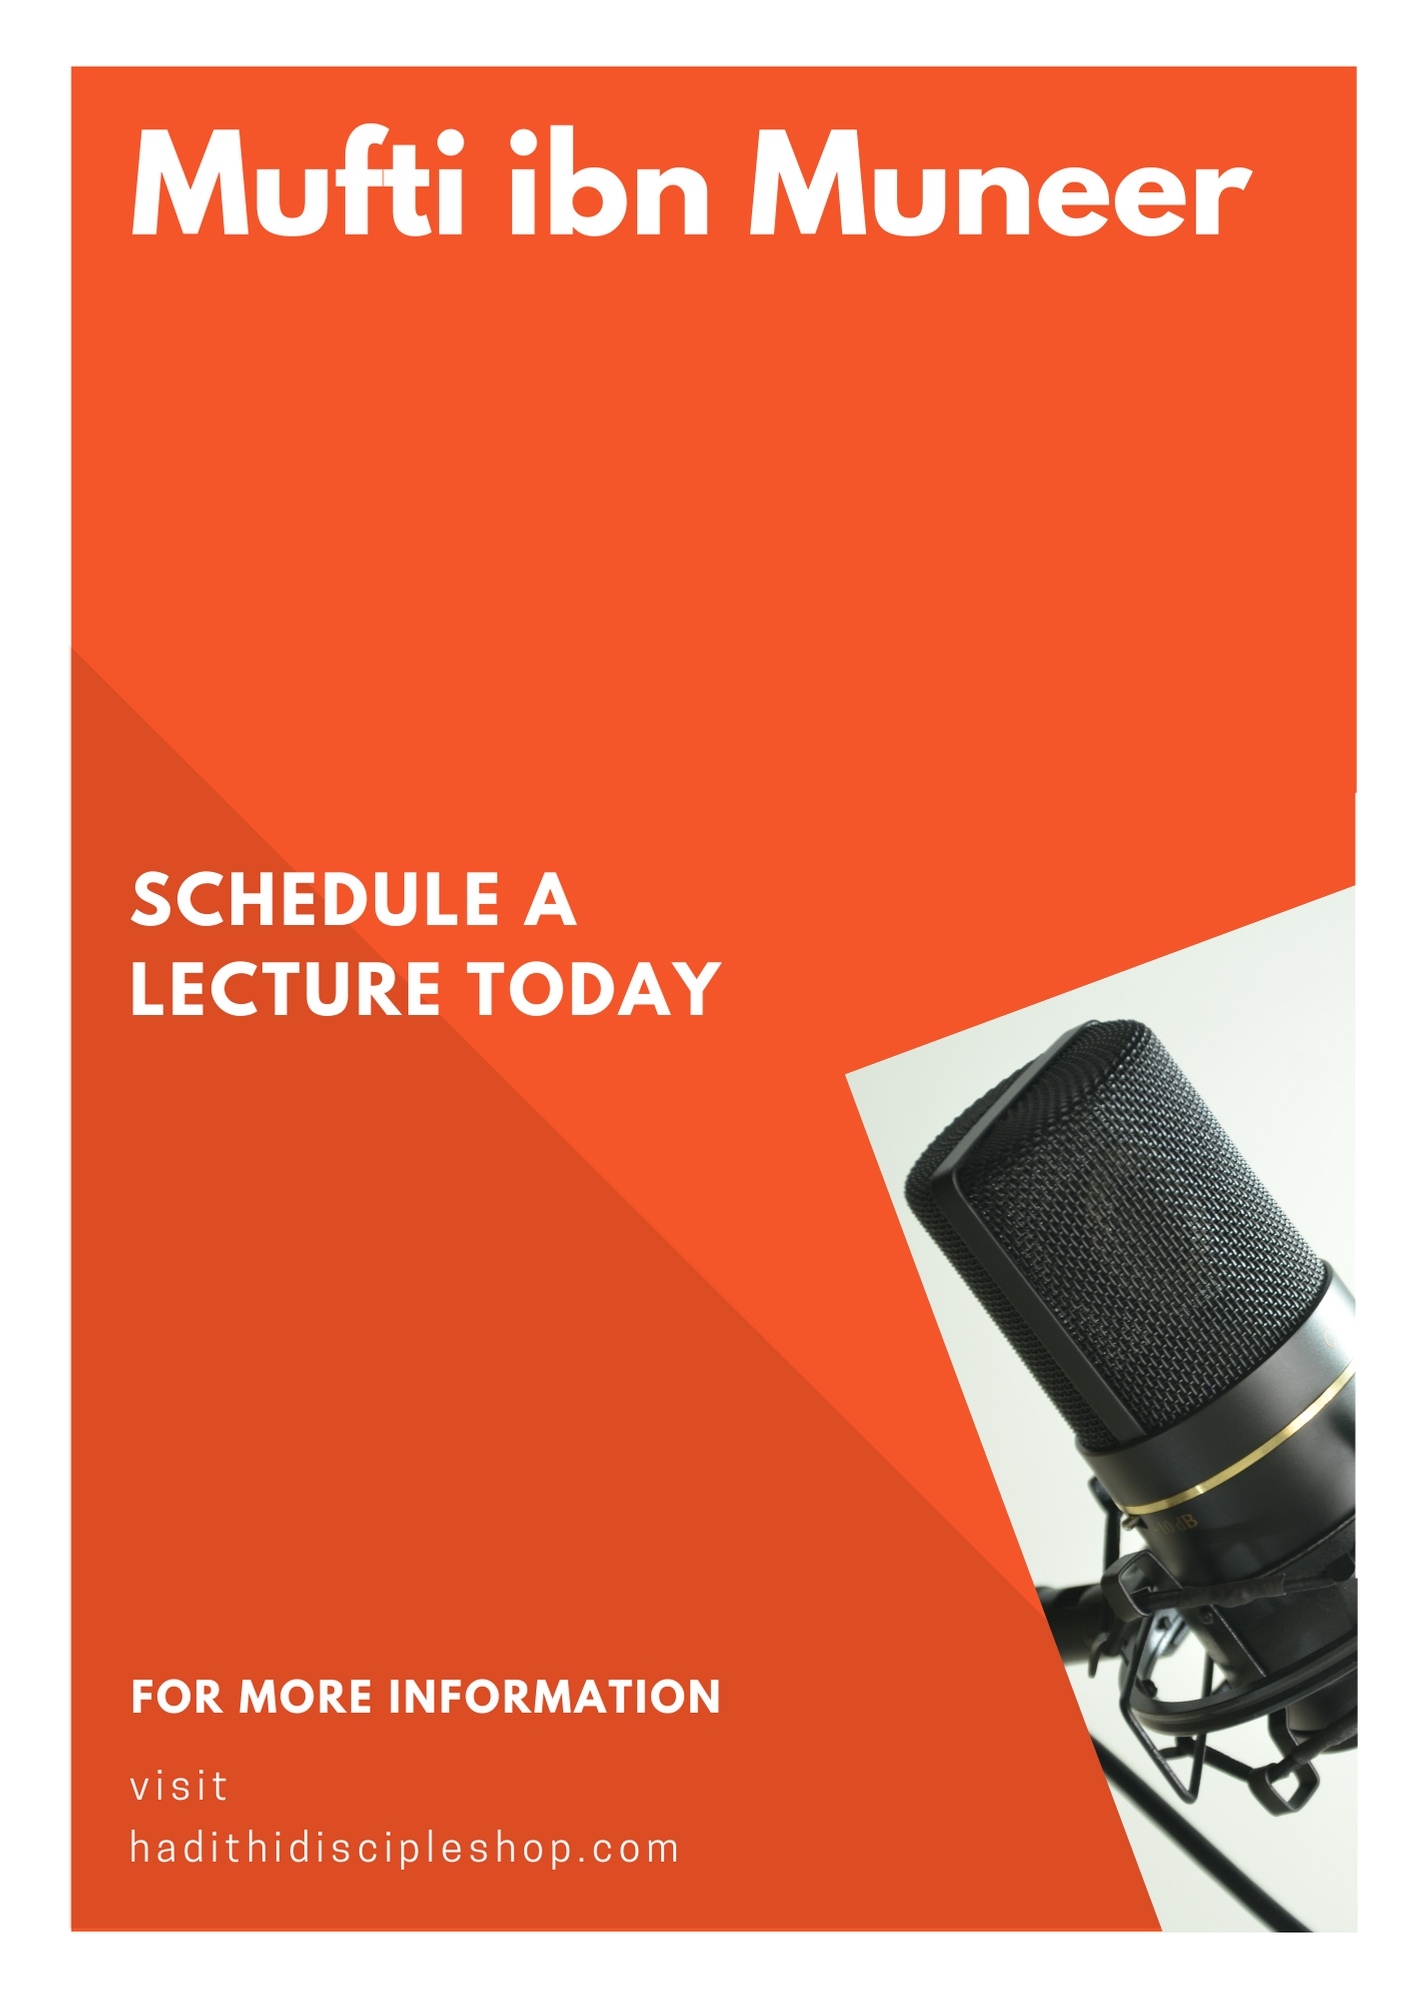 Schedule a Lecture Today